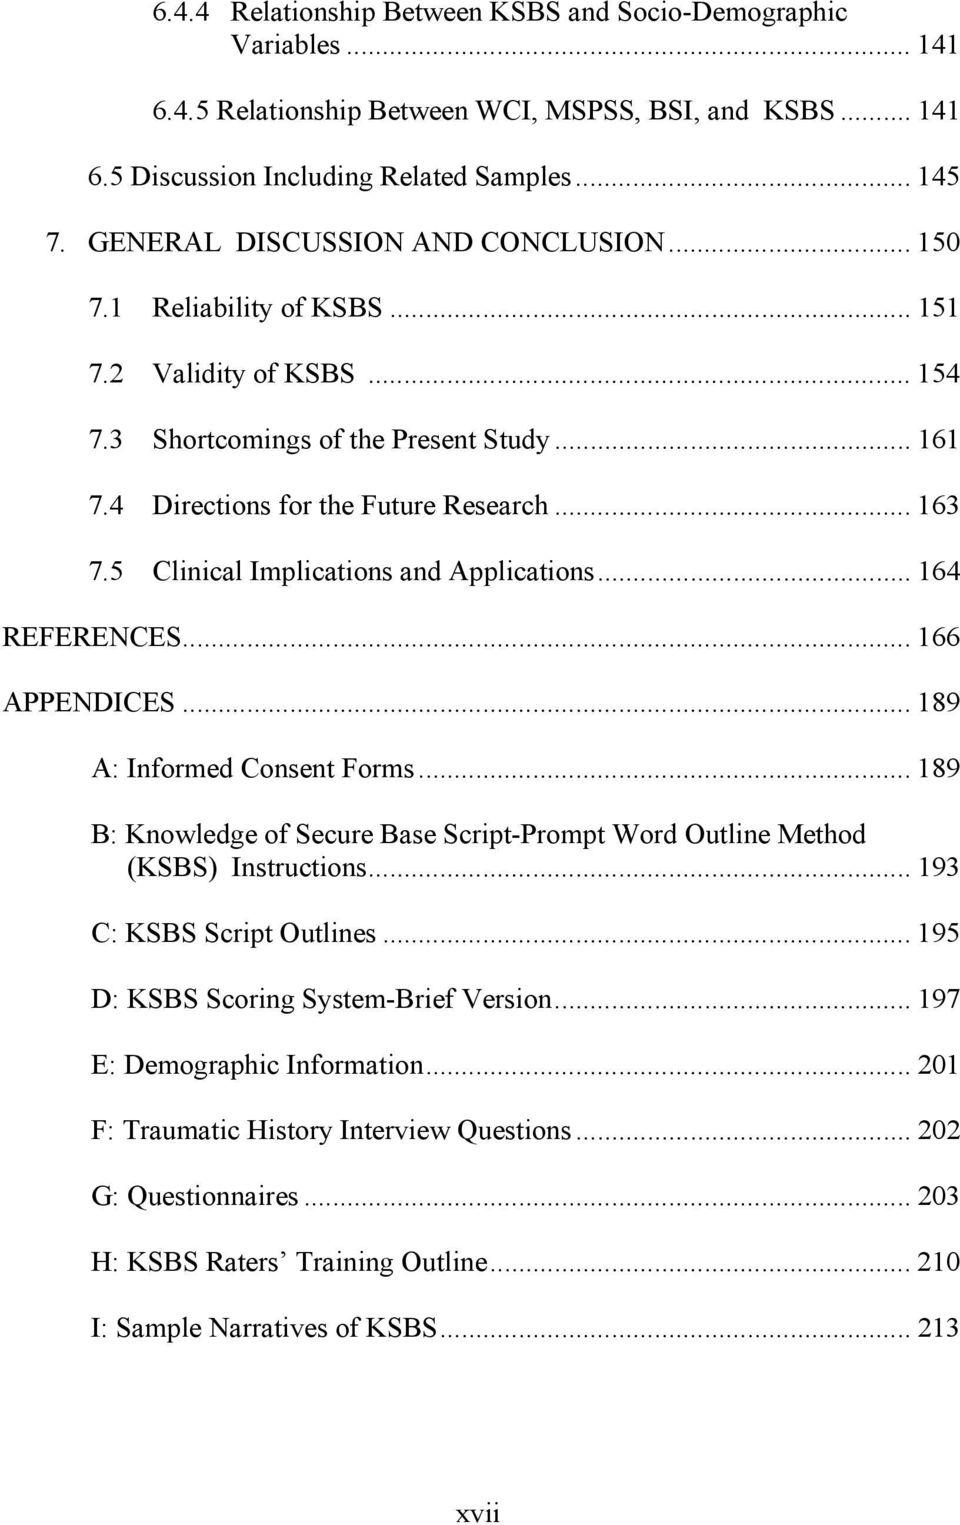 5 Clinical Implications and Applications... 164 REFERENCES... 166 APPENDICES... 189 A: Informed Consent Forms... 189 B: Knowledge of Secure Base Script-Prompt Word Outline Method (KSBS) Instructions.